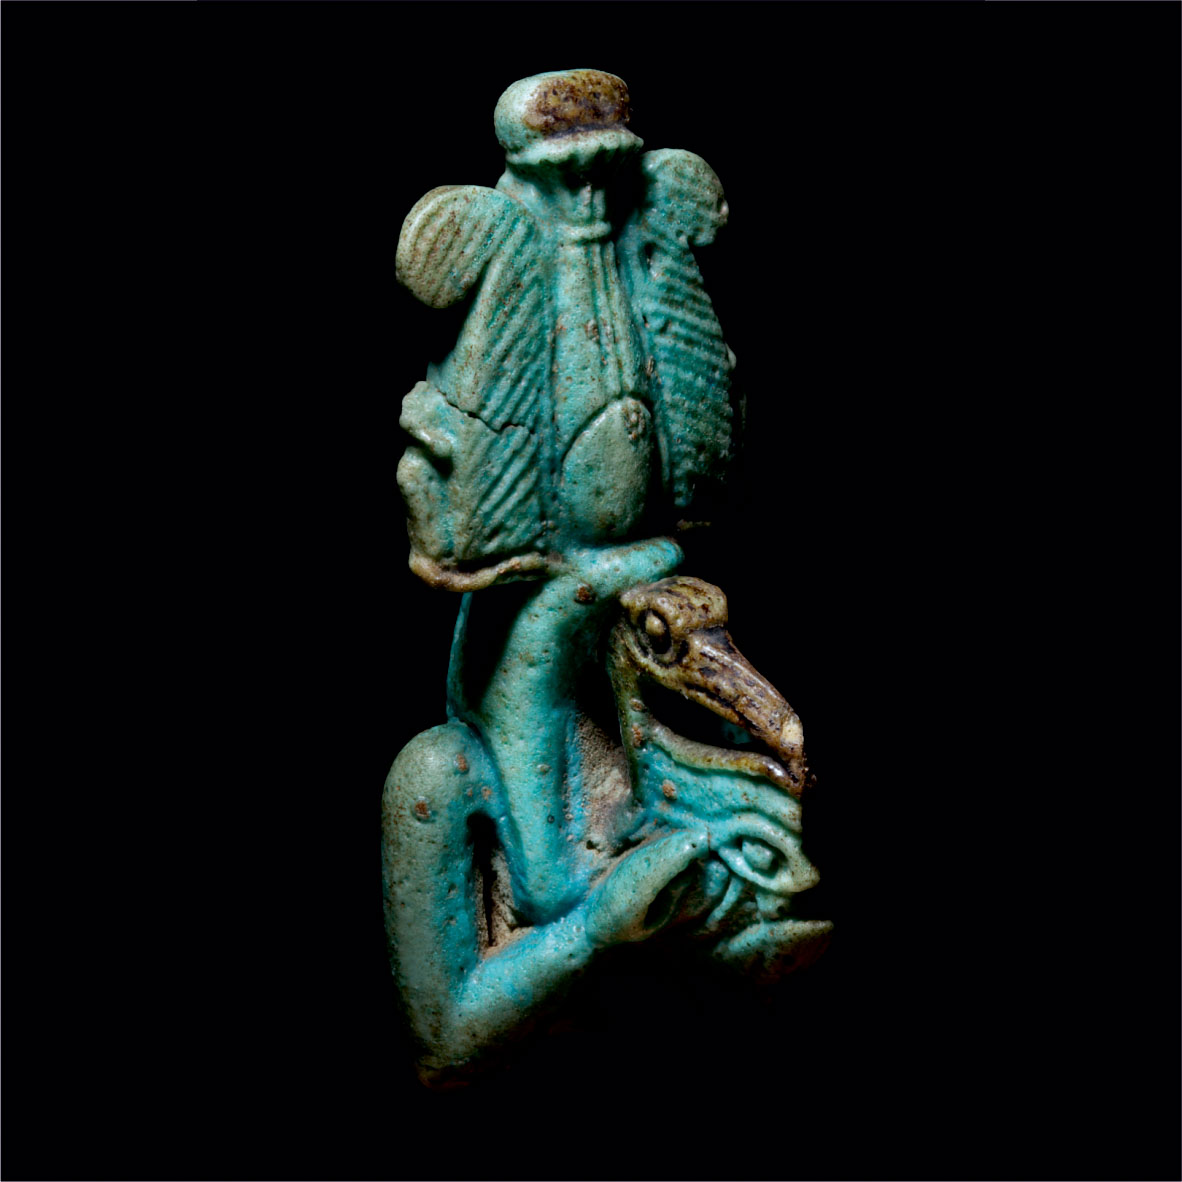 Bright blue amulet of an Ibis-headed man, wearing a crown made of ostrich feathers